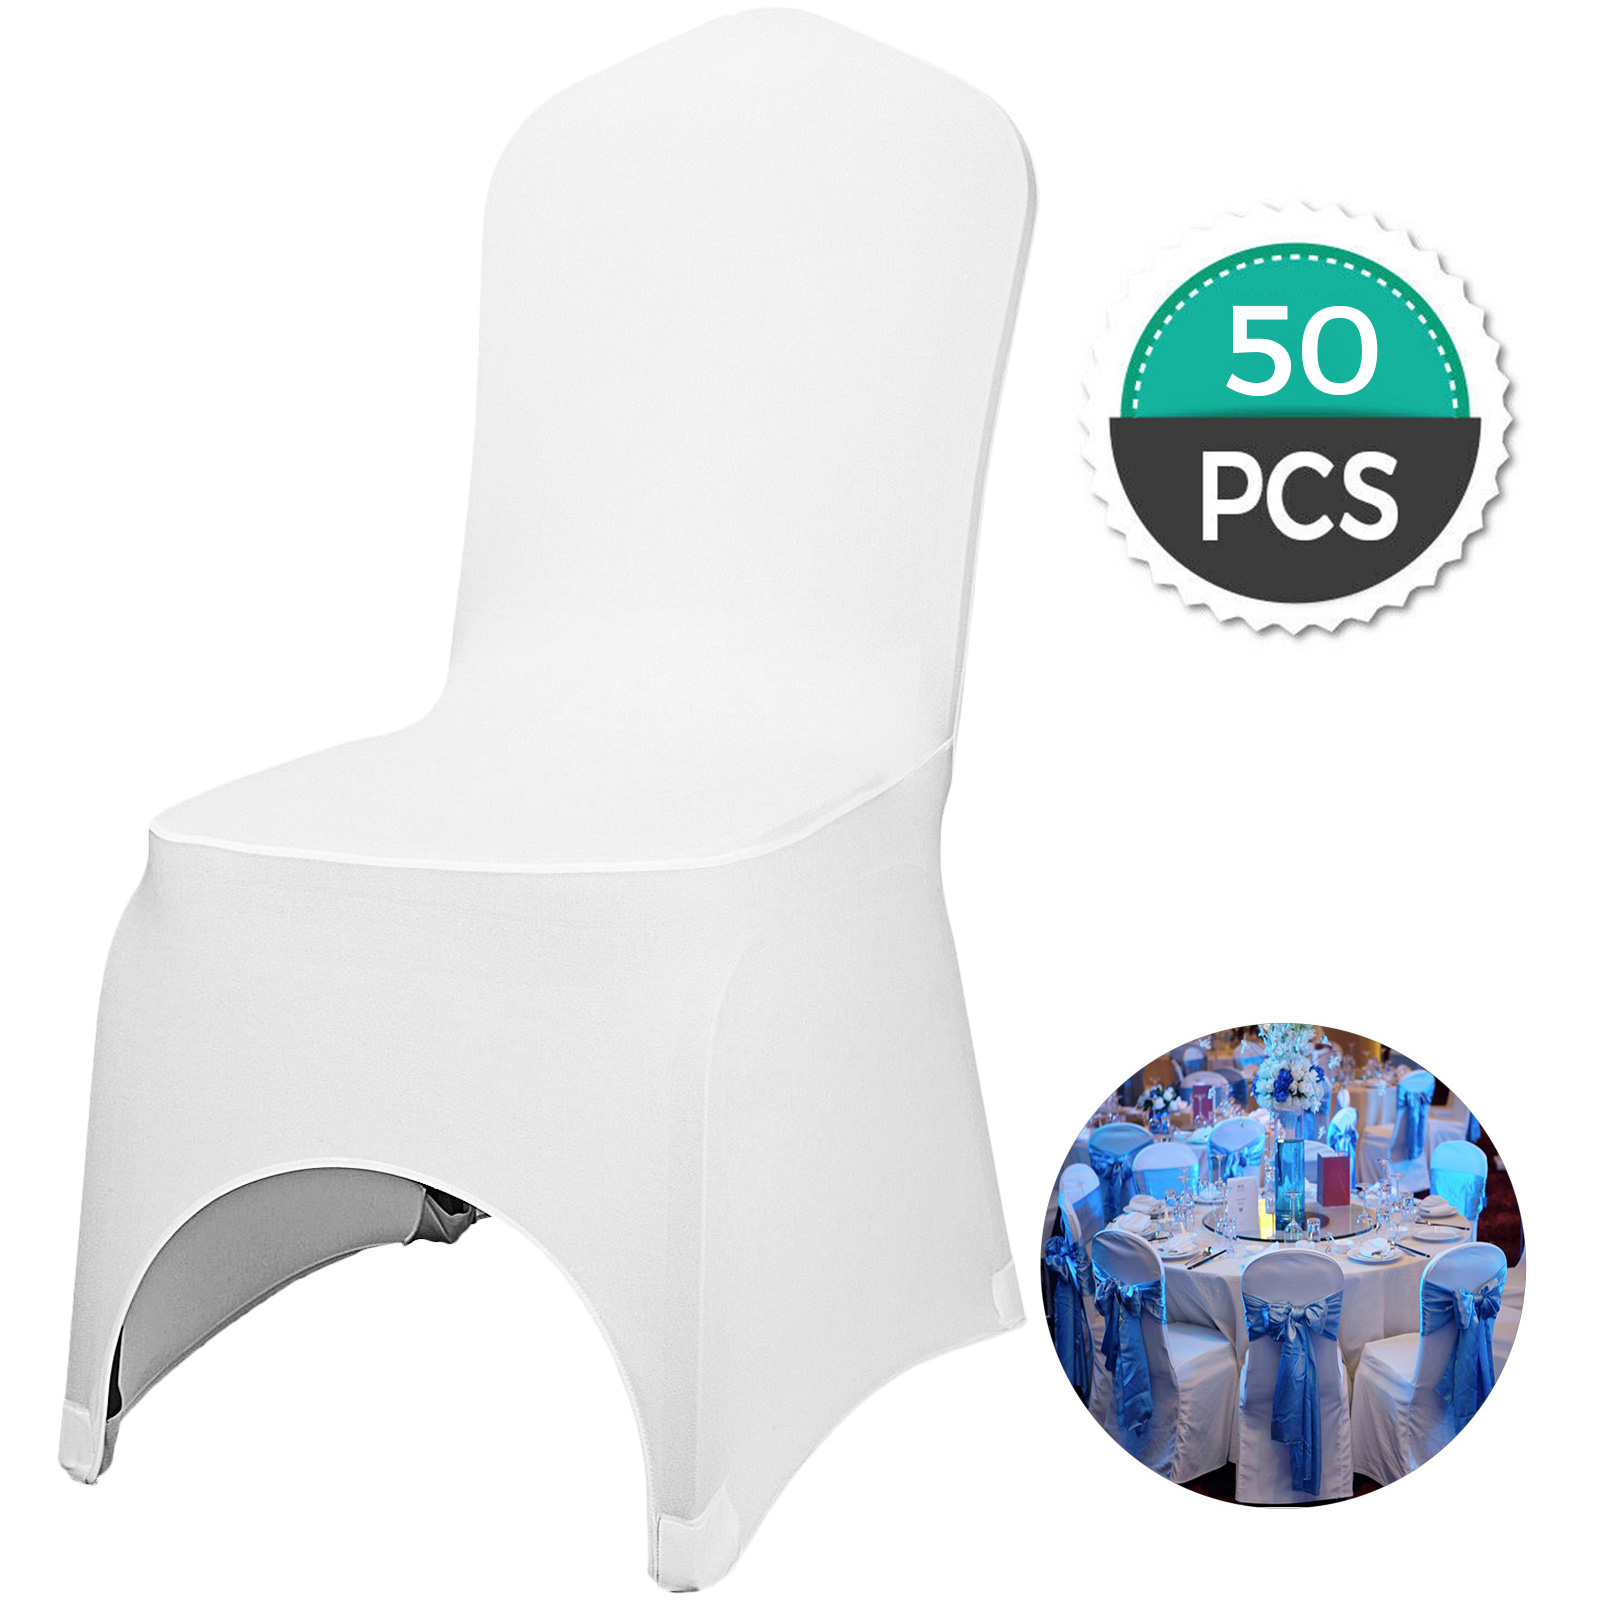 50 Ivory POLYESTER BANQUET CHAIR COVERS Wholesale Wedding Party Decorations